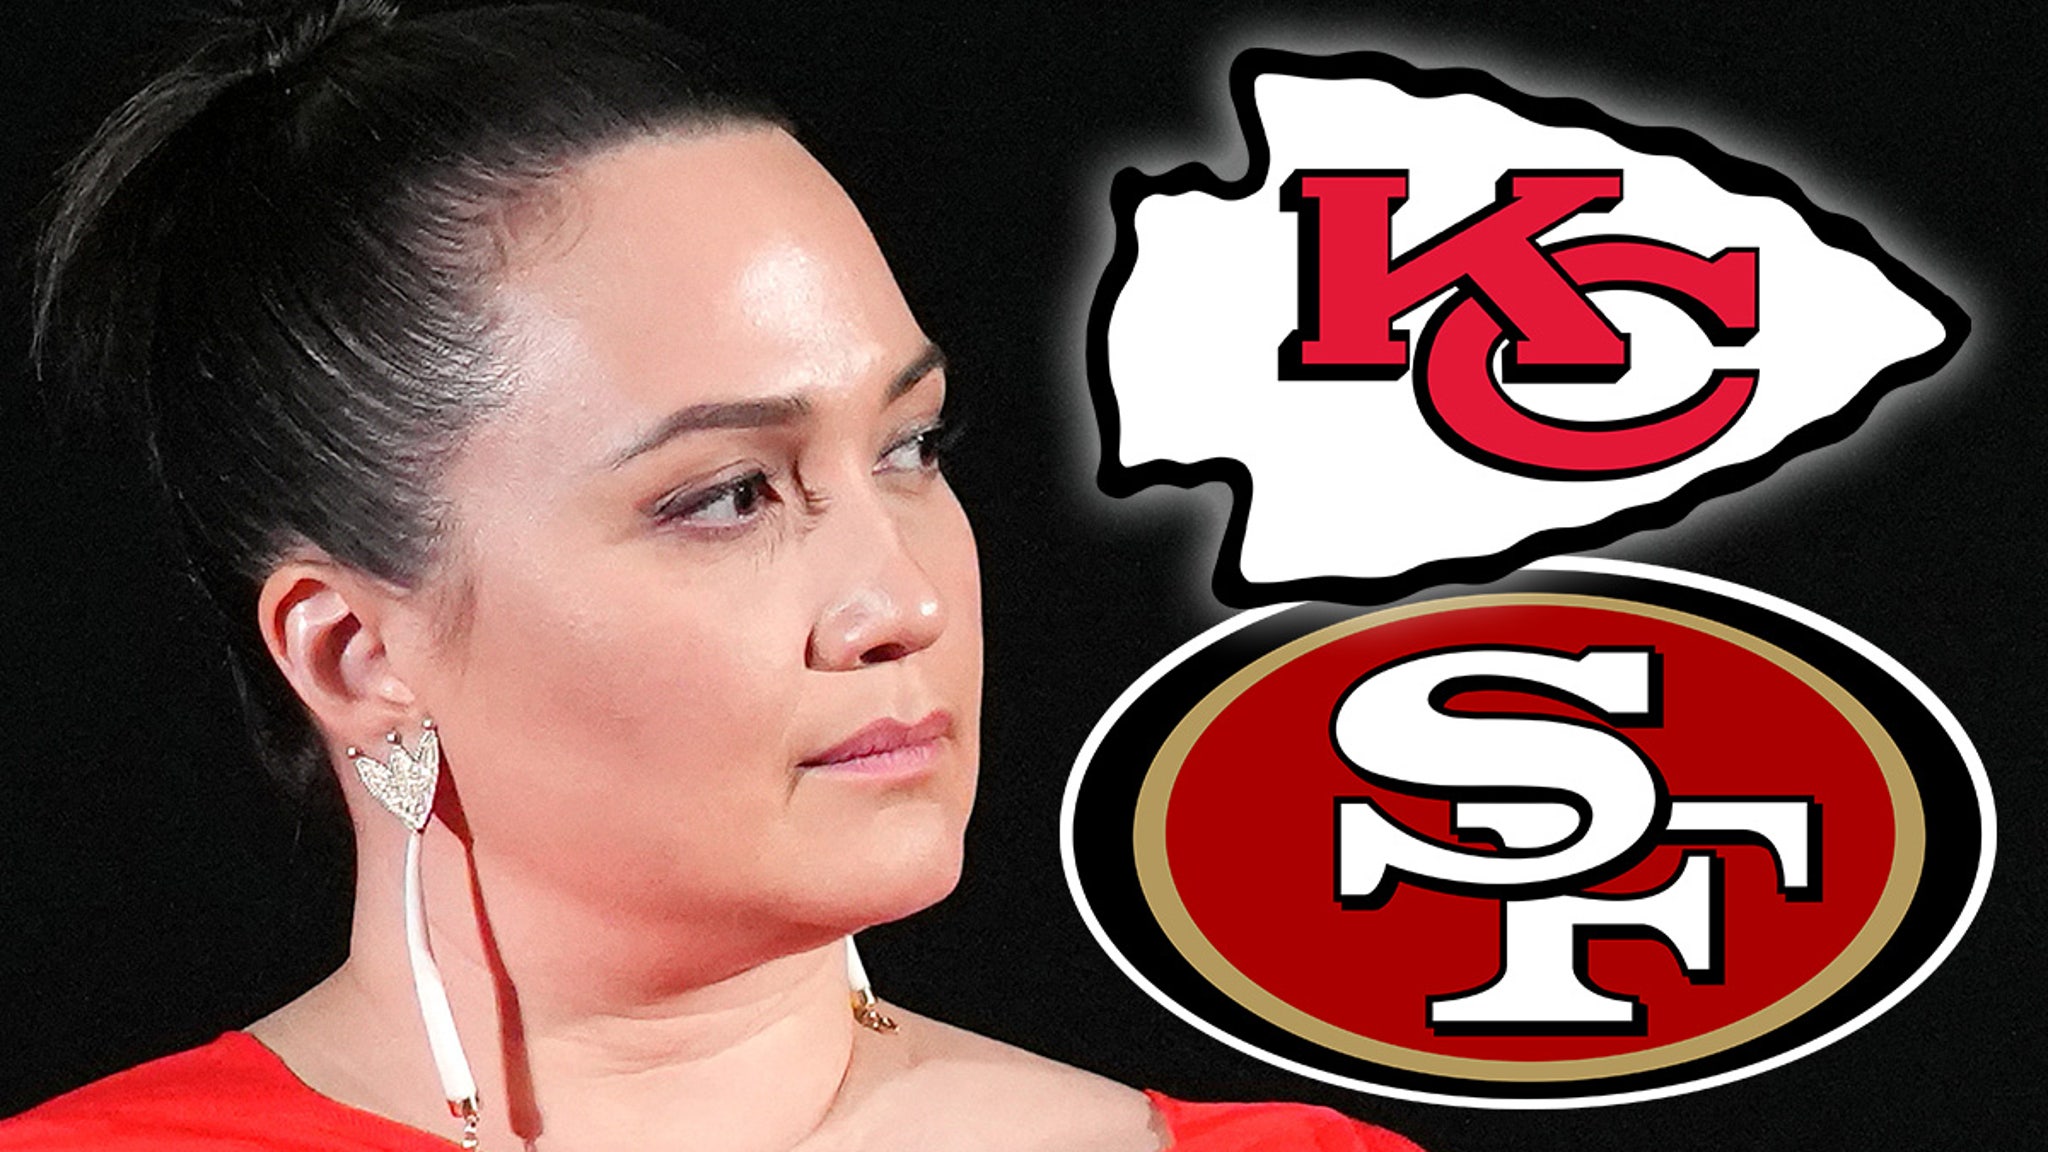 Lily Gladstone Blasts Chiefs, 49ers Mascots As Hurtful